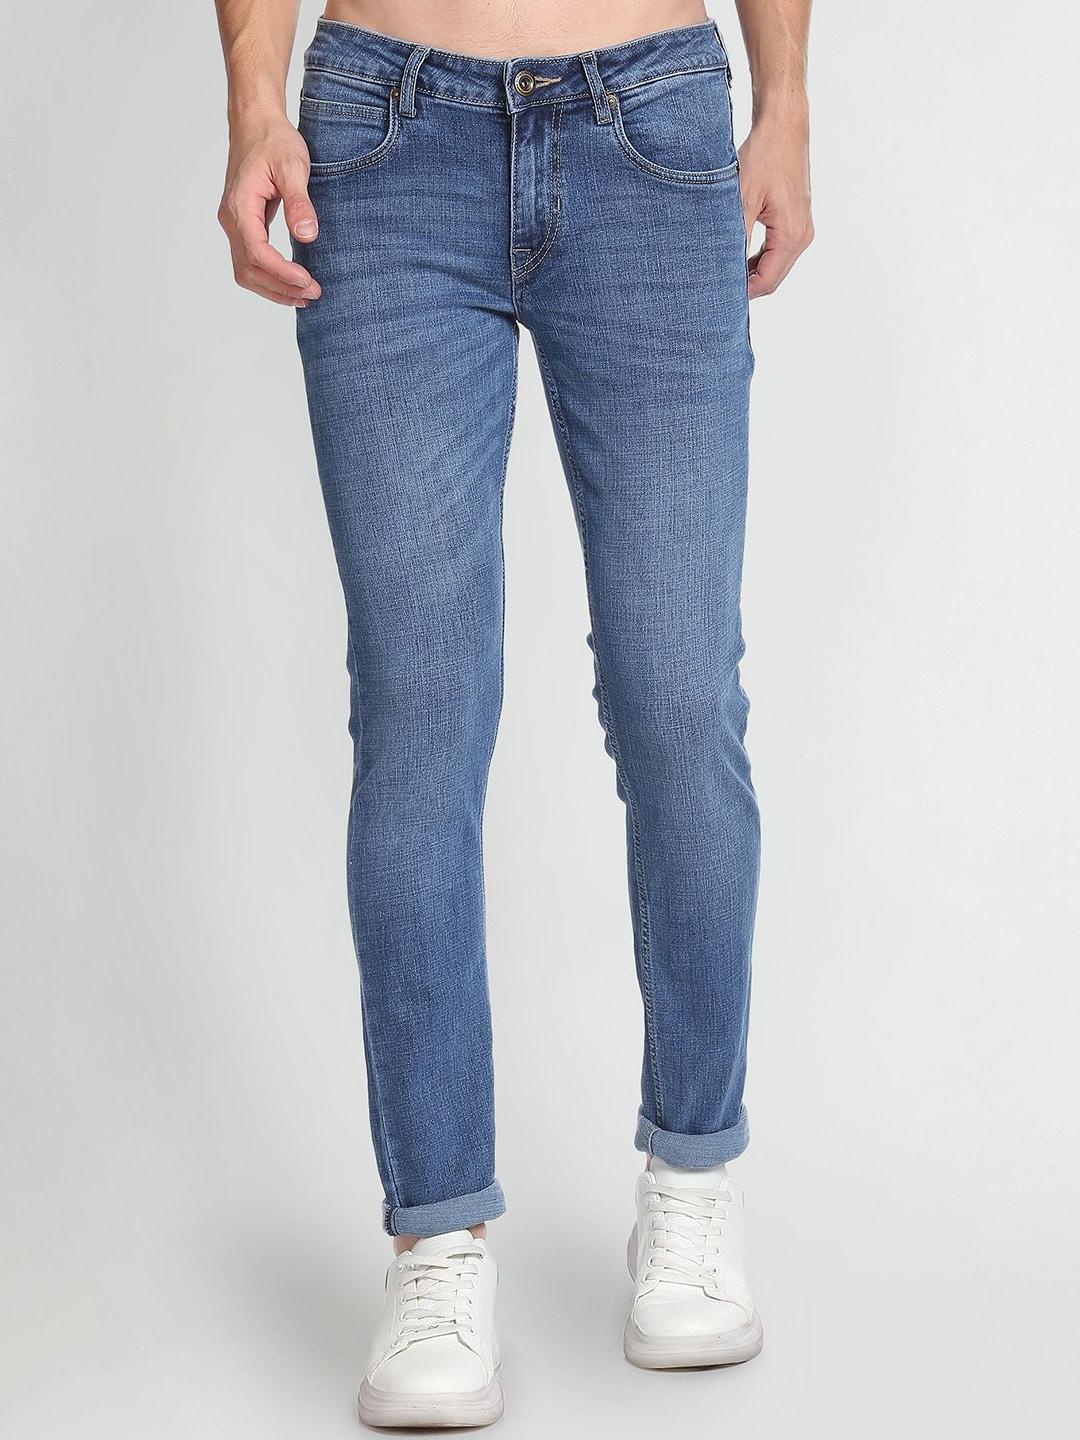 flying-machine-men-skinny-fit-low-rise-light-fade-stretchable-jeans